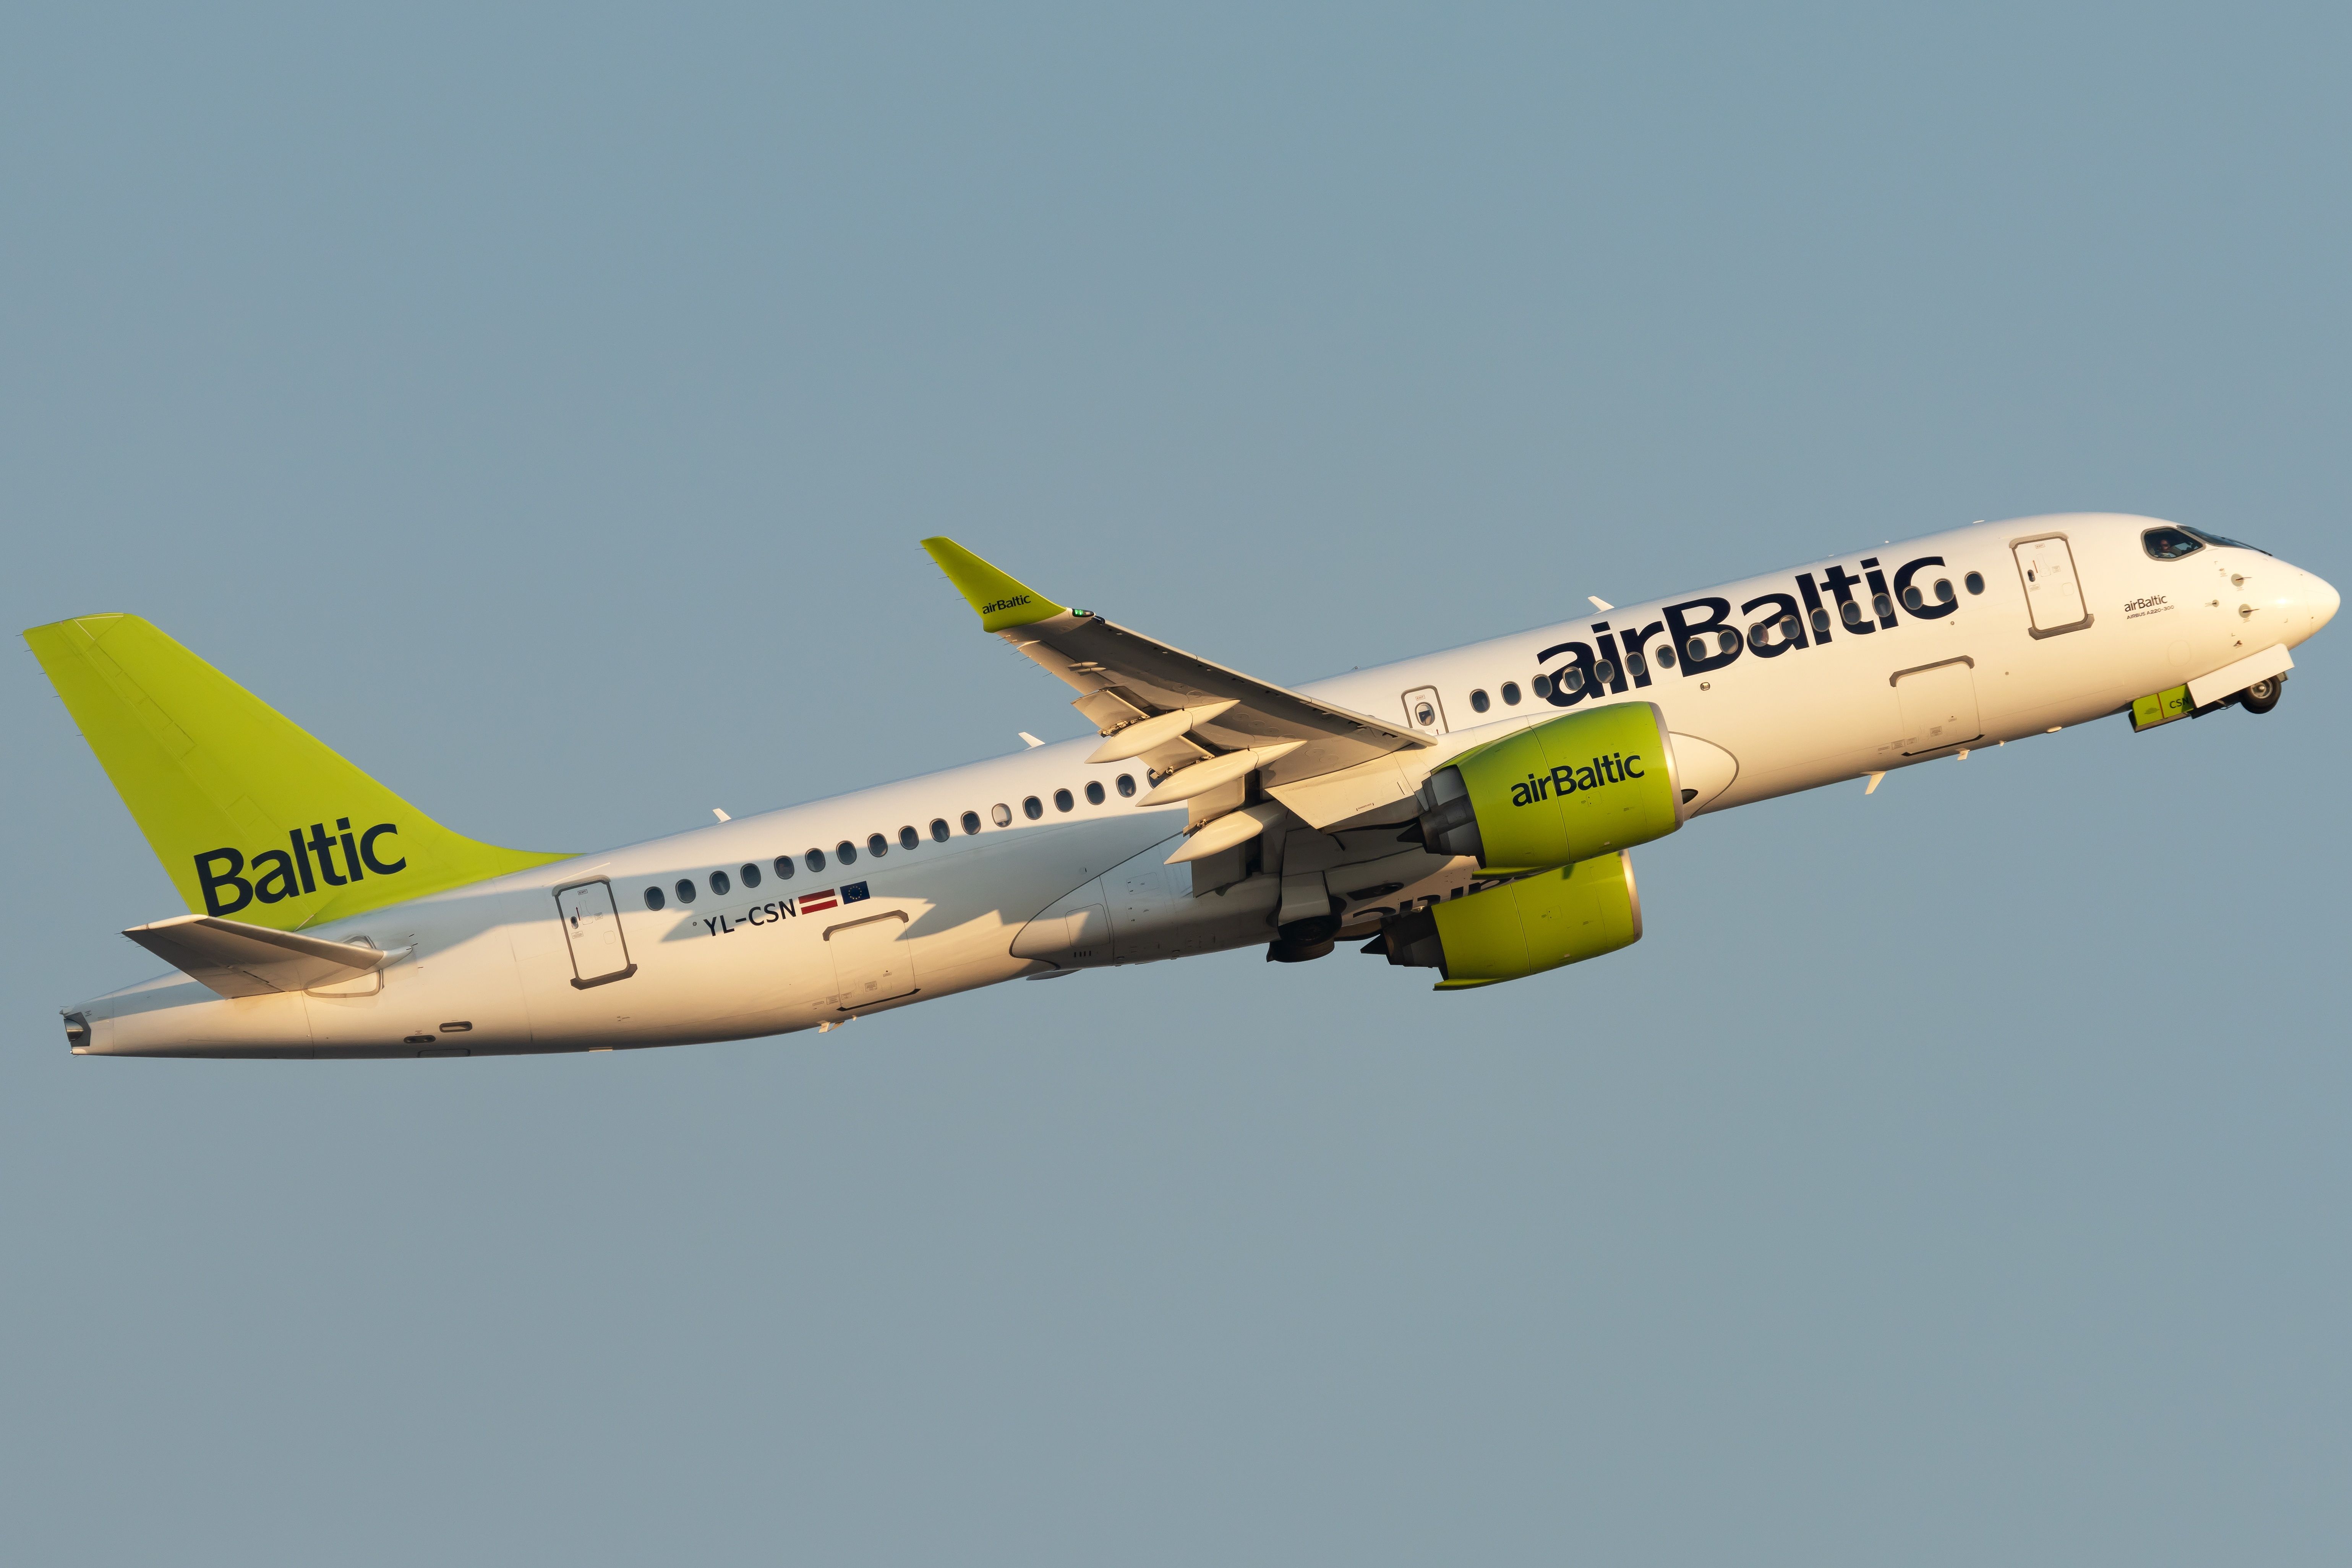 airBaltic Airbus A220-300 taking off from Rome Fiumicino Airport.